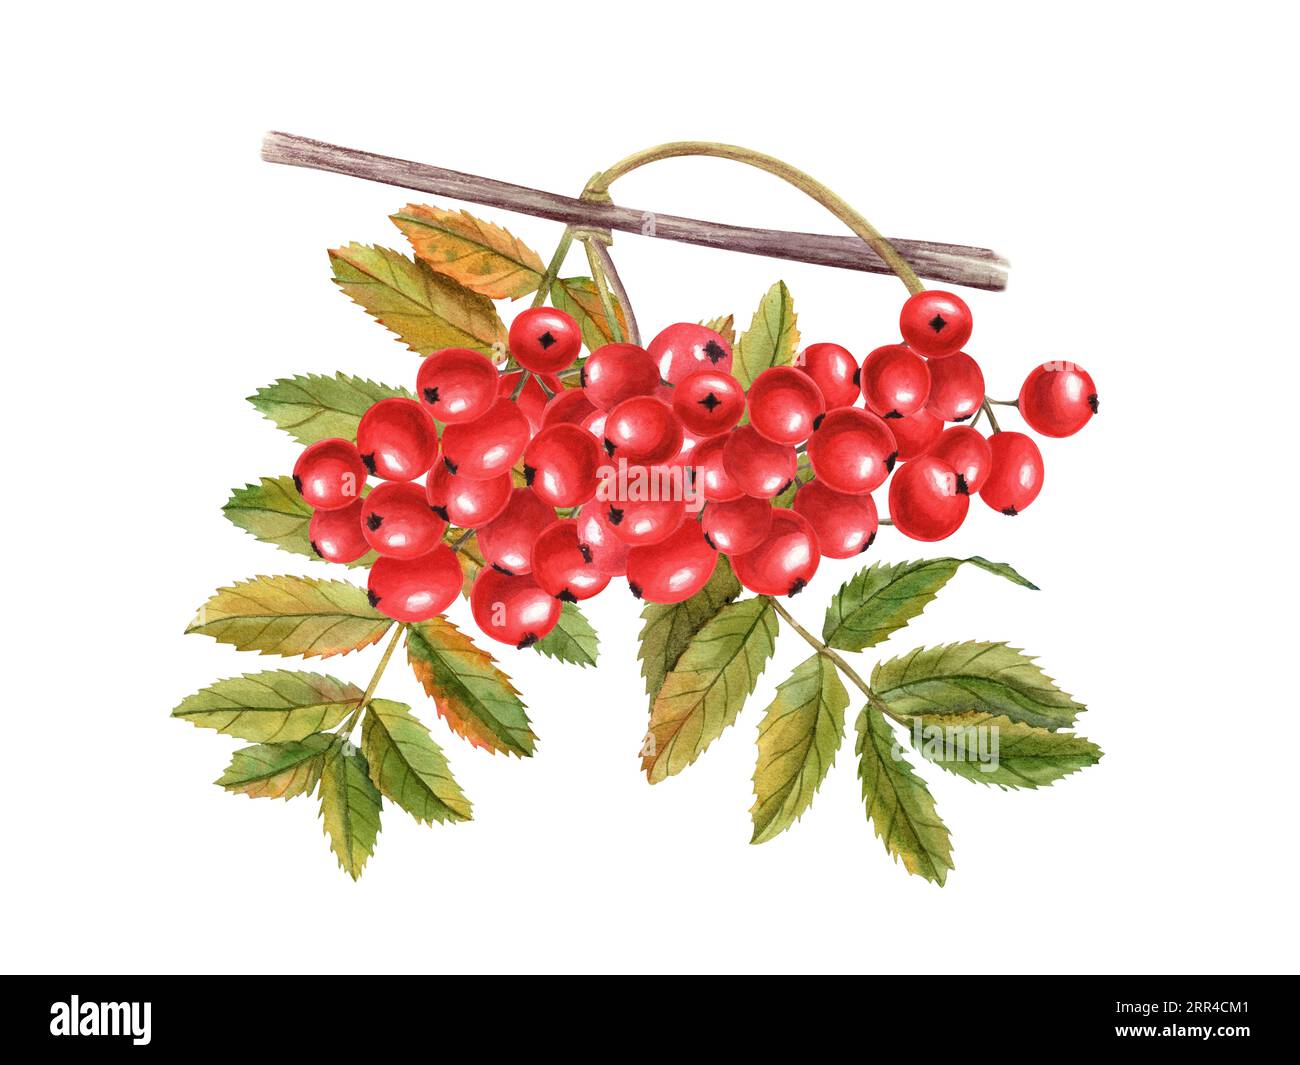 Autumn bunch of ripe rowan berries with leaves. Rustic fall arrangement with rowanberry. Sorbus aucuparia, mountain-ash, quick beam. Stock Photo